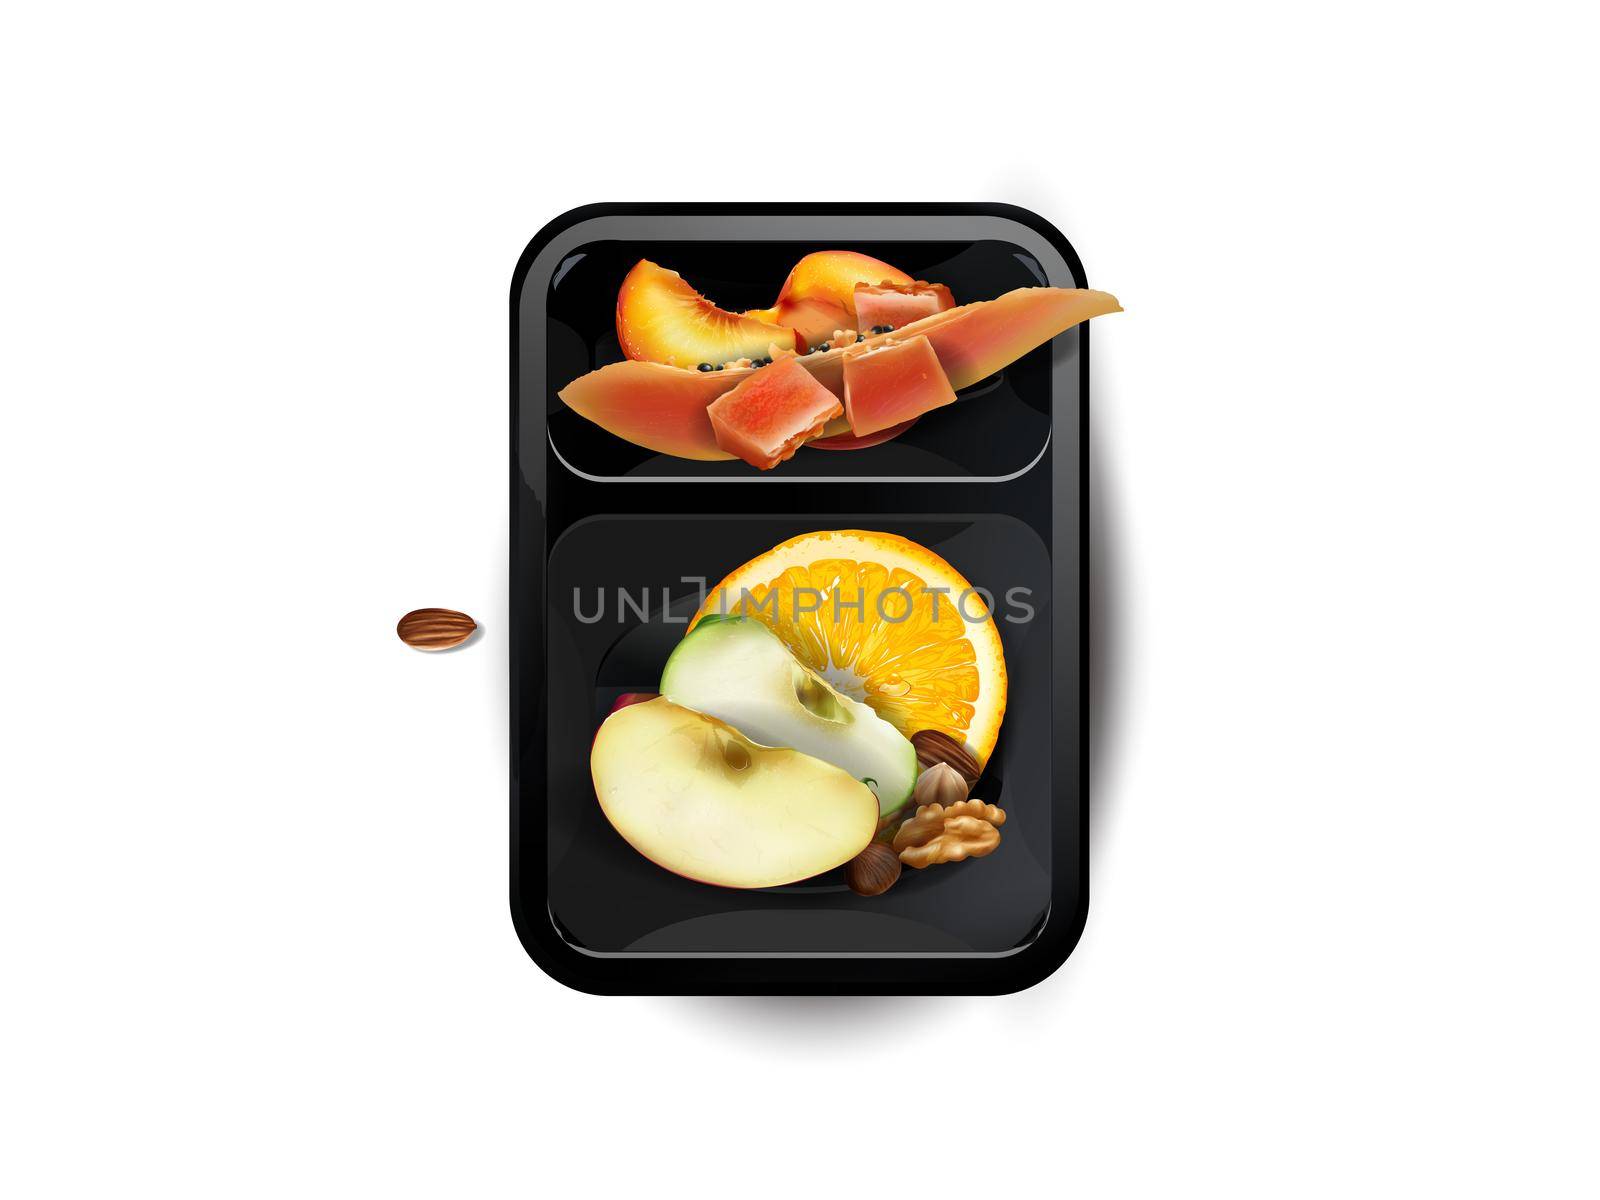 Assorted fruits with nuts in a lunchbox on a white background, top view. Realistic style illustration.